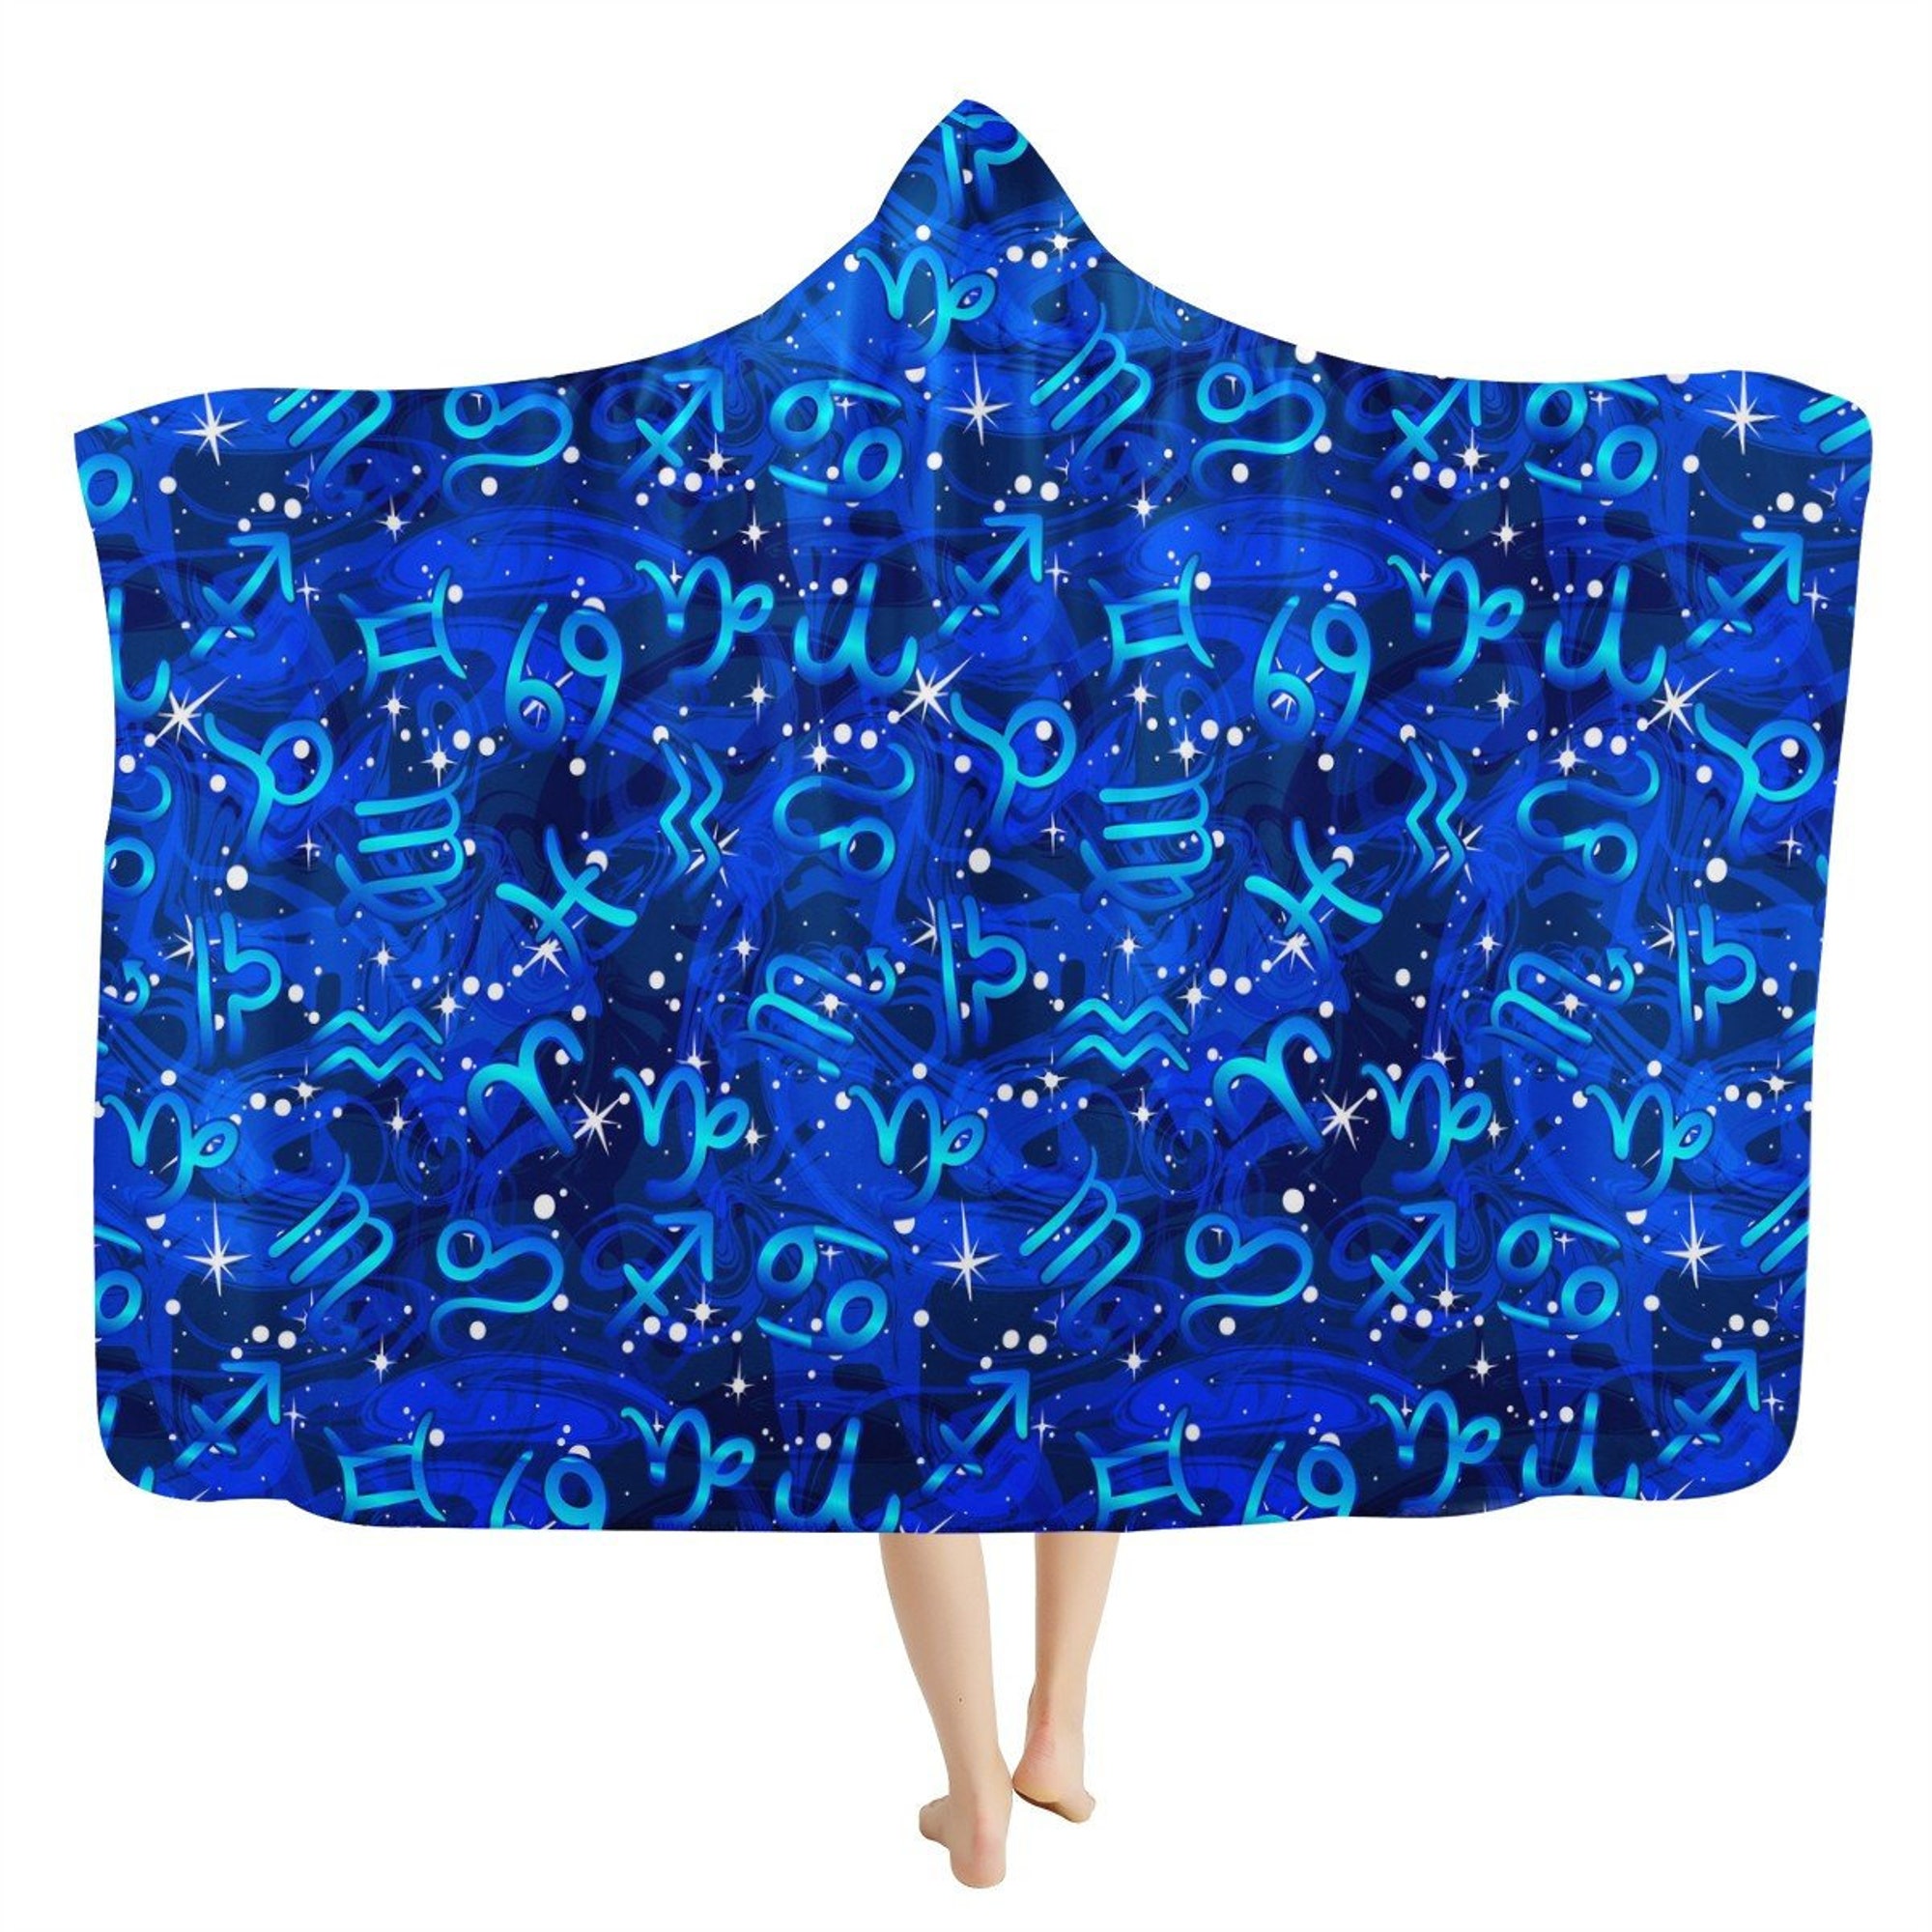 Blue Zodiac Signs Hooded Blanket - Horoscope, Astrology Throw, Cozy Hooded Sherpa, Zodiac Gifts, Constellations Wearable Blanket Hoodie